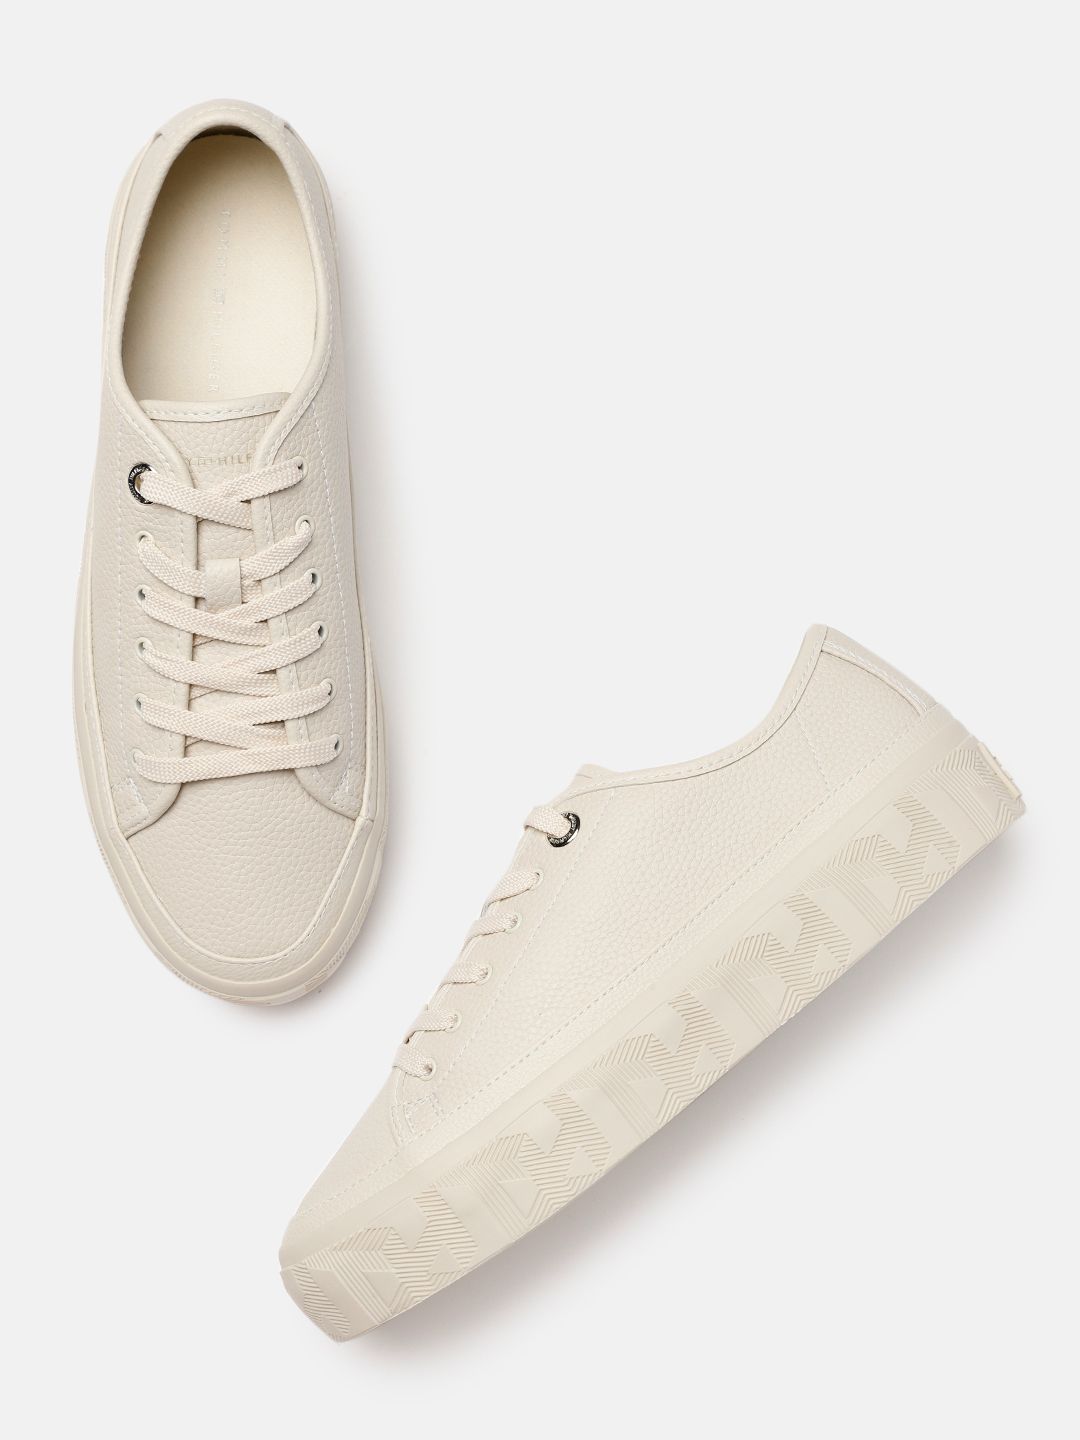 Tommy Hilfiger Women Off White Textured Leather Regular Sneakers Price in India